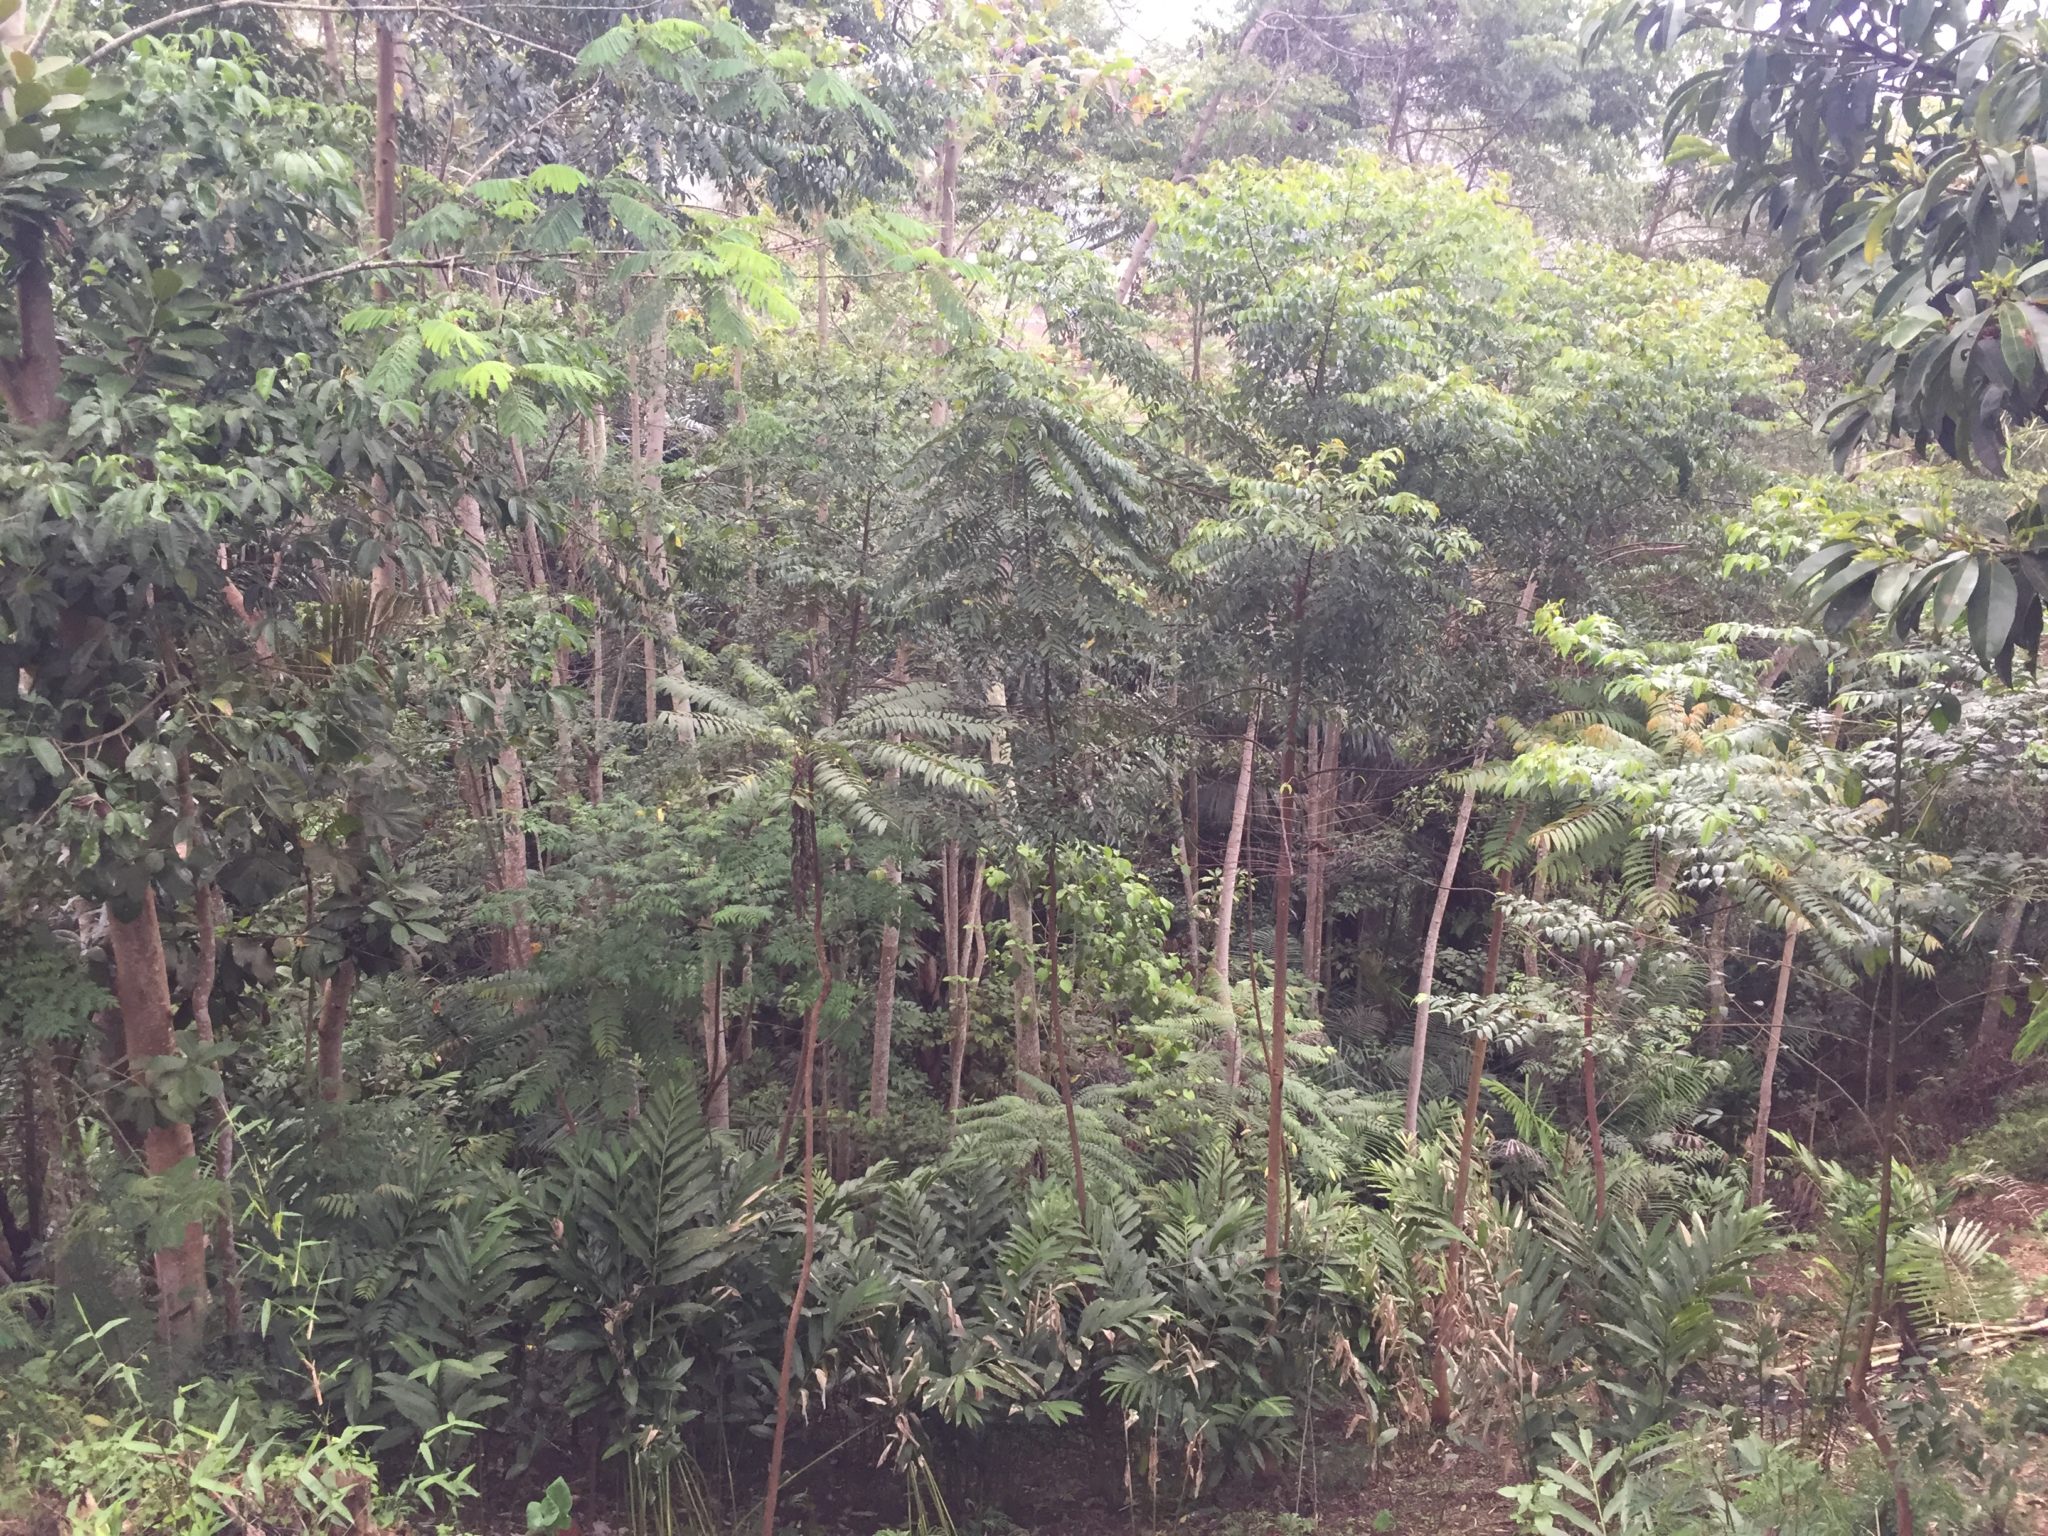 Protected forest at Puncak Baru, Indonesia